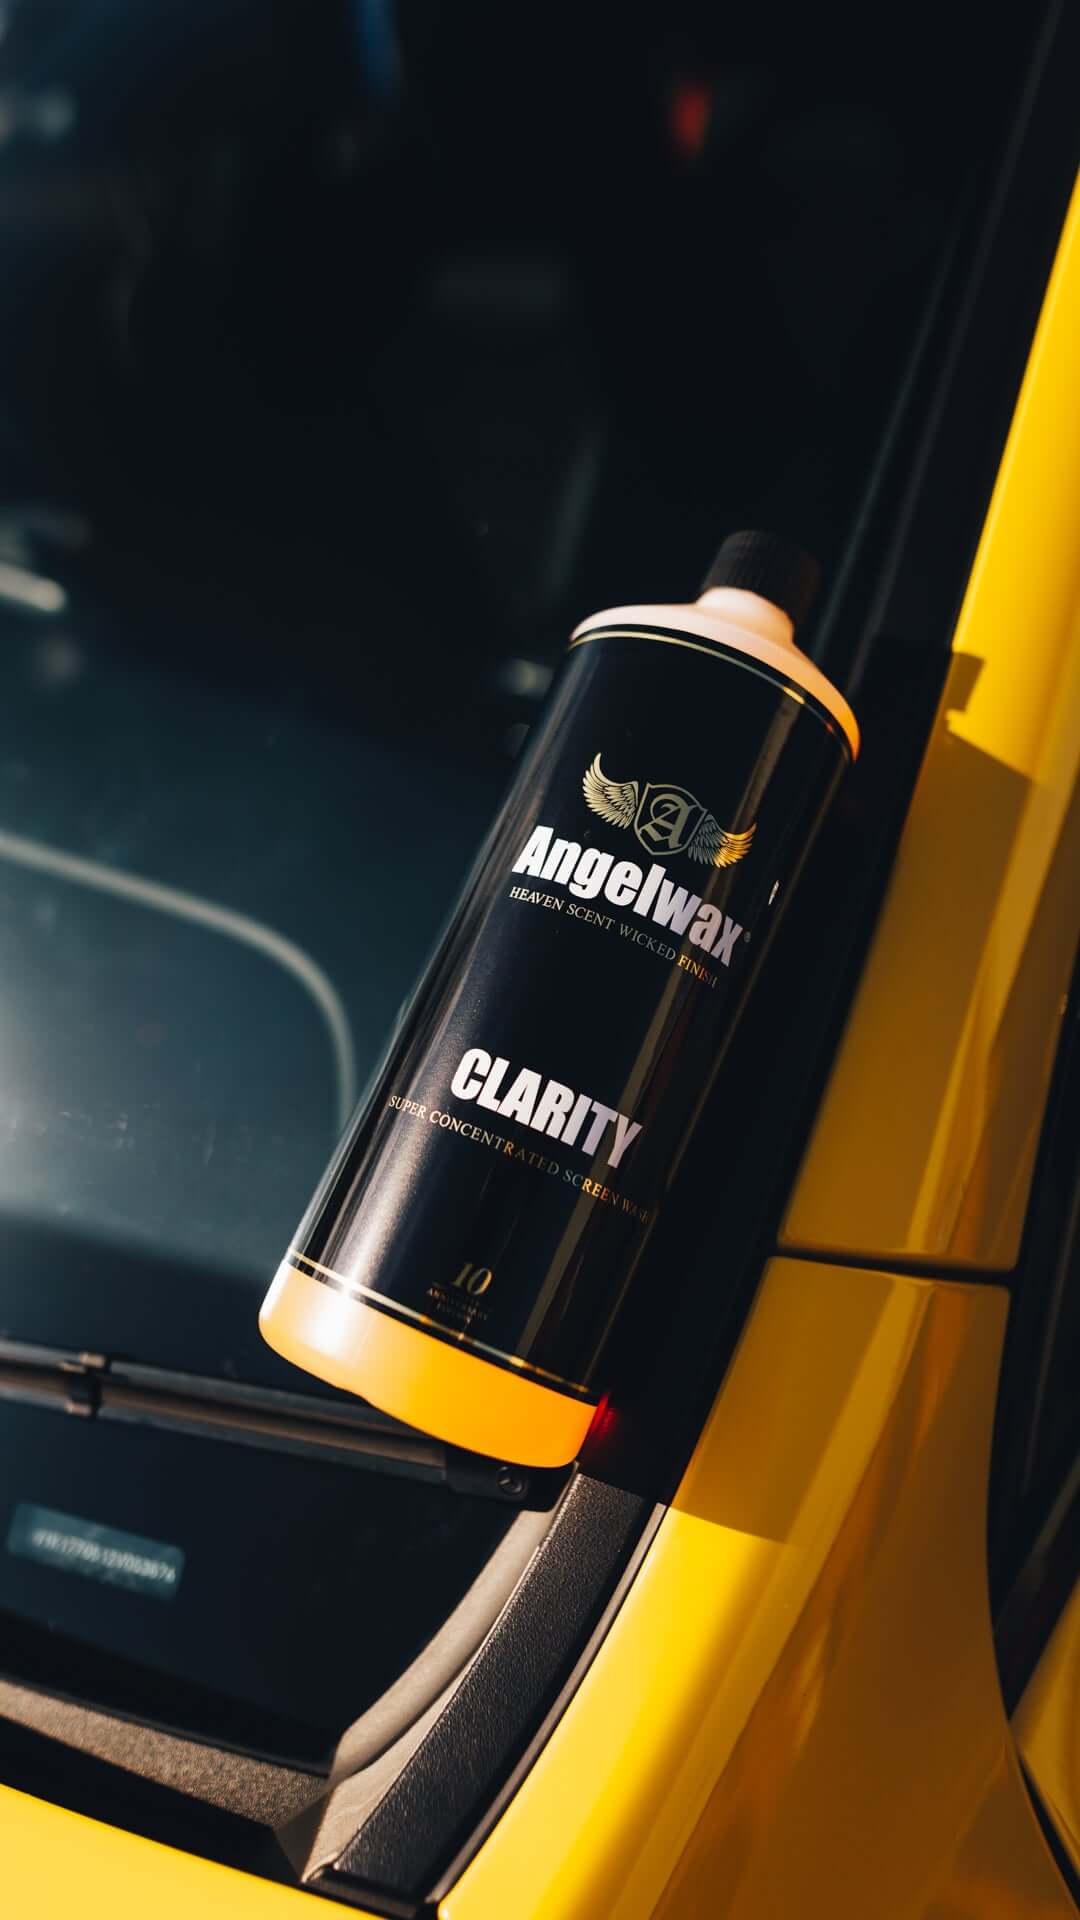 Angelwax - Clarity Super Concentrated Screen Wash 1 Litre